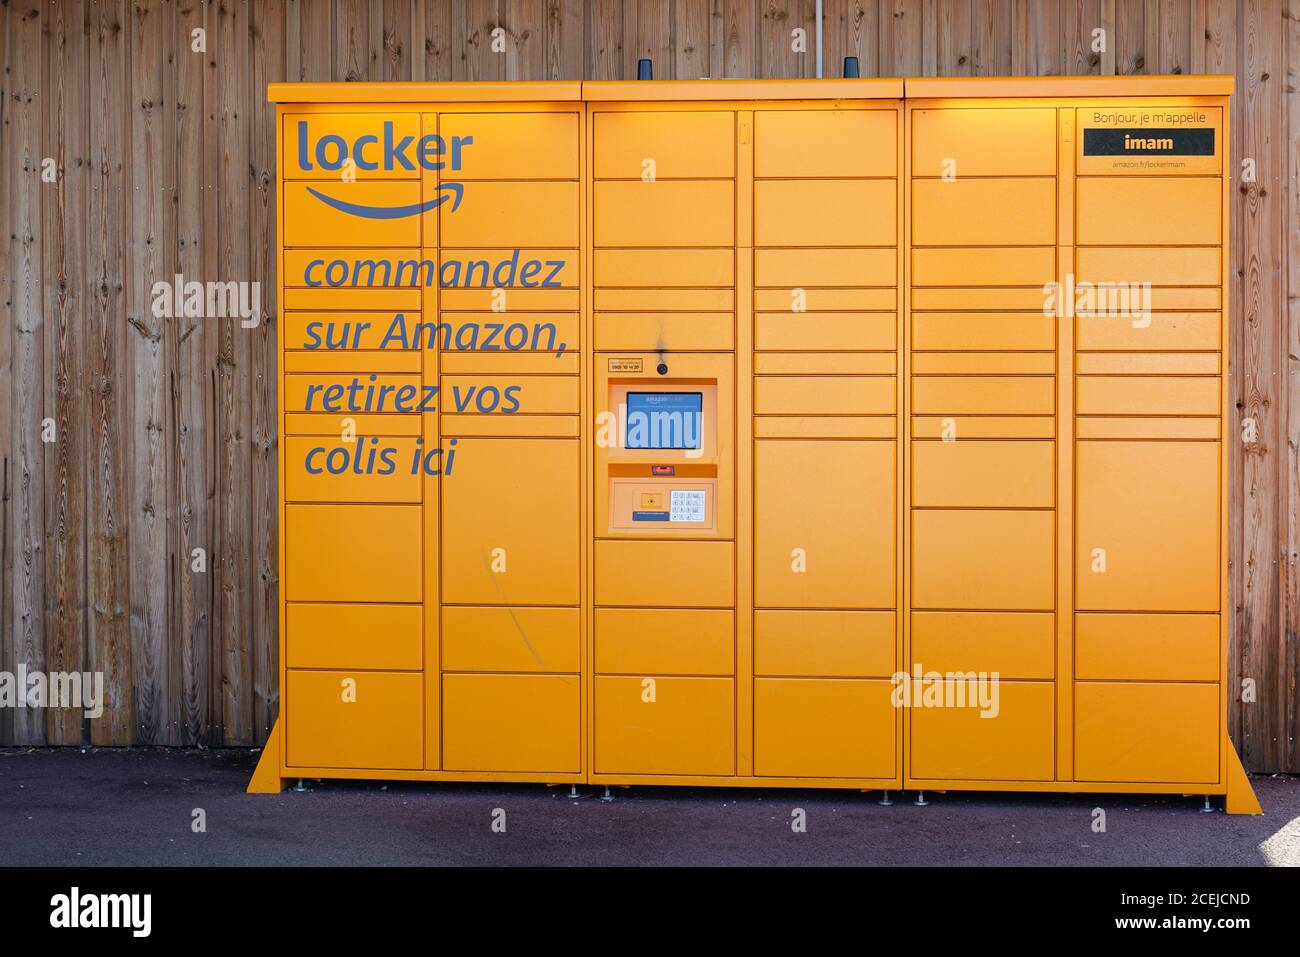 Bordeaux , Aquitaine / France - 08 25 2020 : Amazon Locker Delivery Store  yellow boxes for self-service delivery location to pick up and return  parcel Stock Photo - Alamy